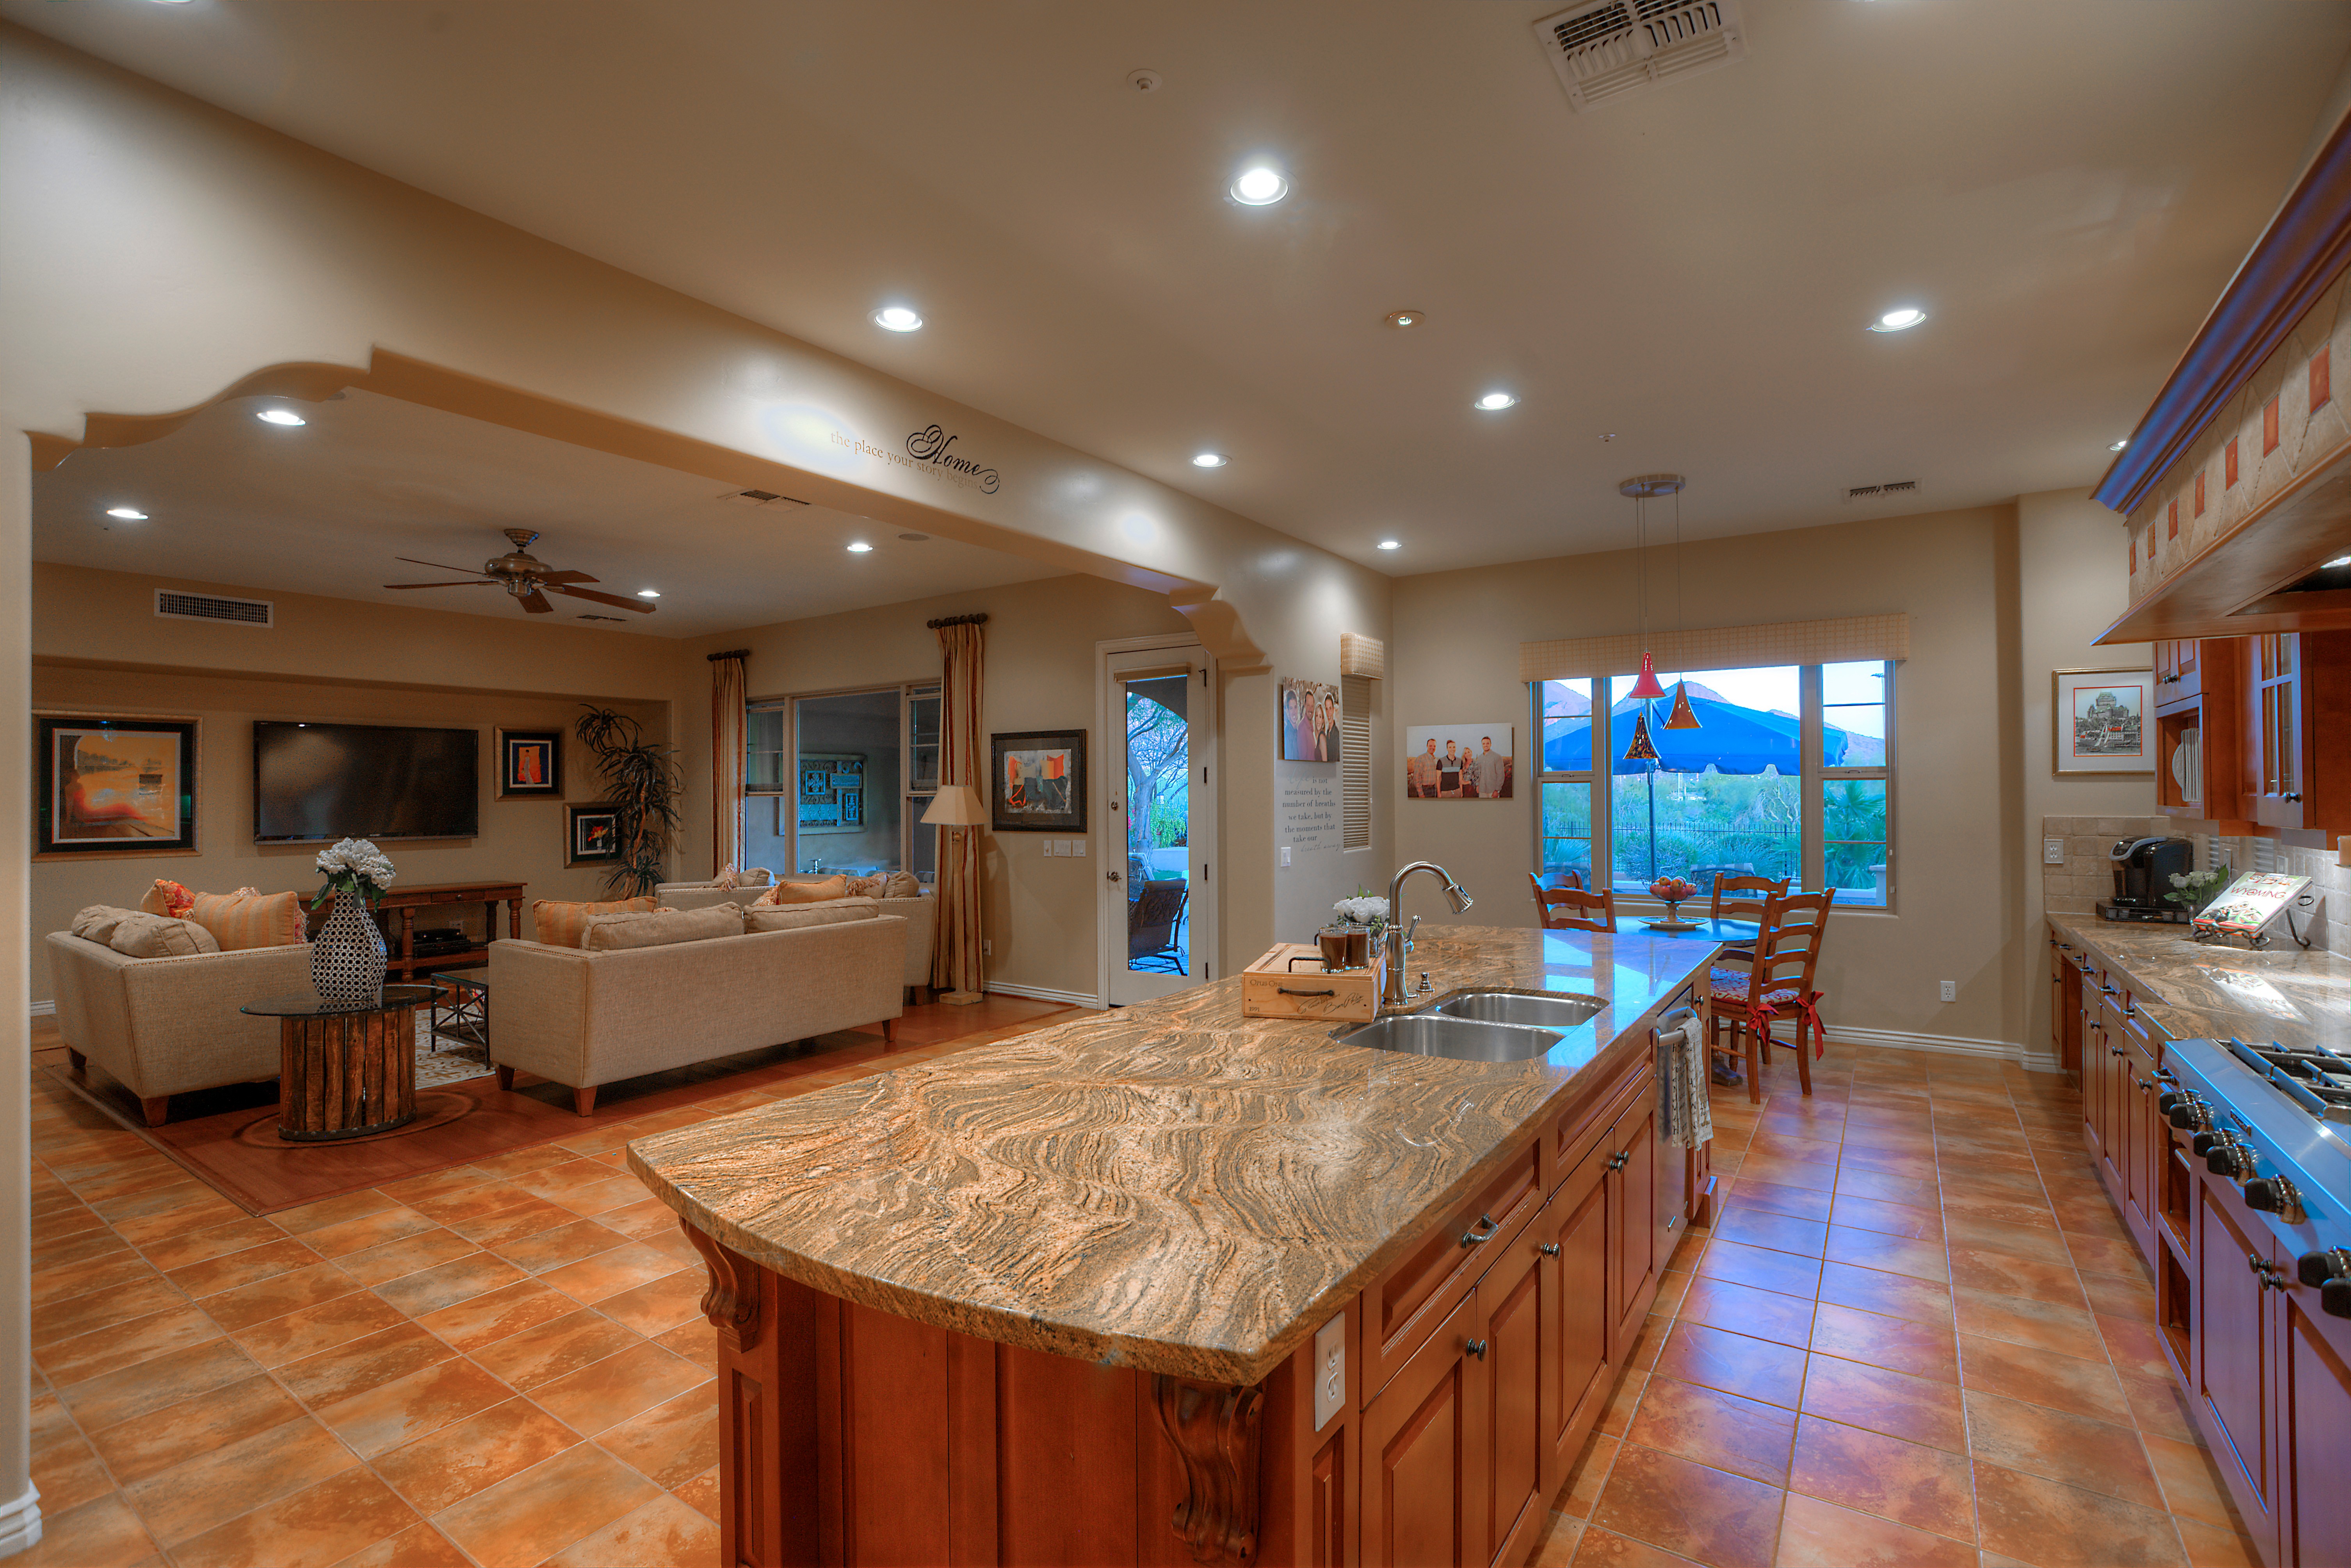 Inviting gourmet kitchen at this Scottsdale home for sale in DC Ranch located at 19829 N 97th Pl Scottsdale, AZ 85255 listed by Don Matheson at The Matheson Team